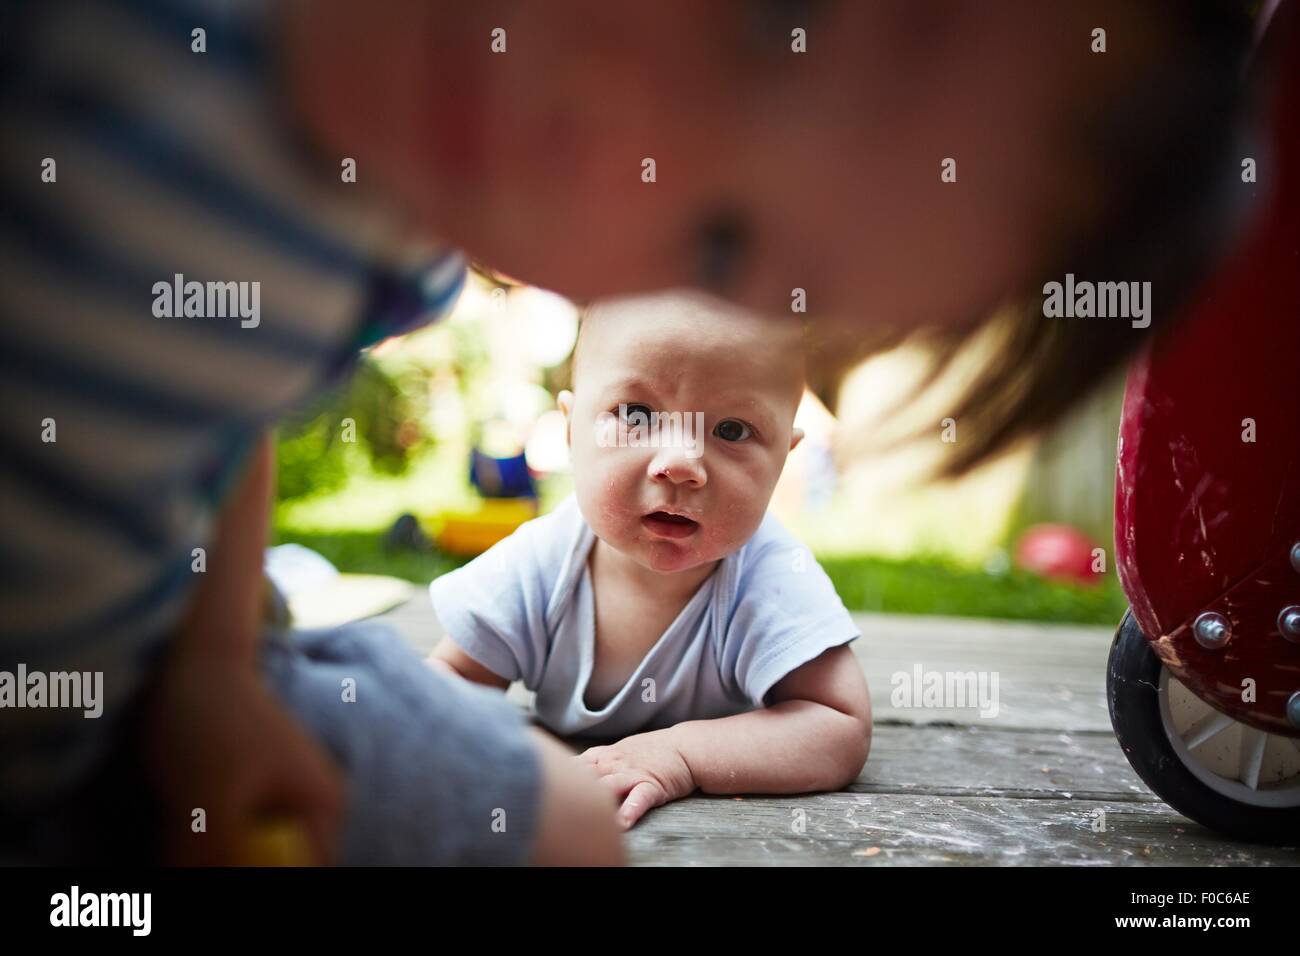 Portrait of baby boy lying down looking at camera with older brother in foreground Stock Photo